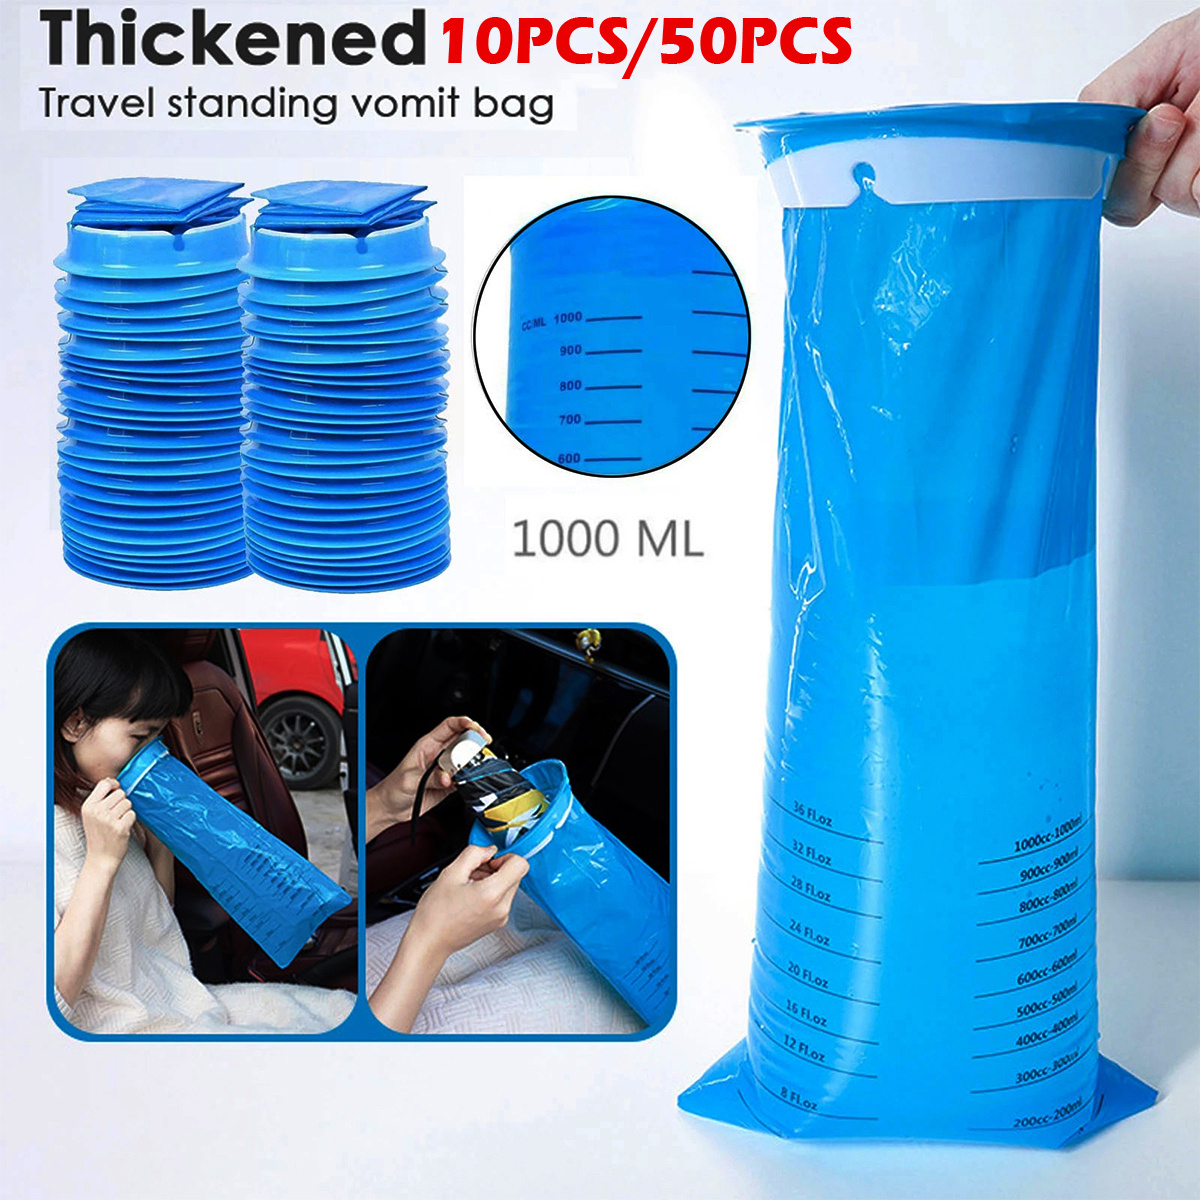 10pcs 50pcs 1000ml Emesis Bags Portable Vomit Bags For Kids Adults And Sick People Outdoor Travel Driving Pregnant Women Secure Leak proof Vomit Bag